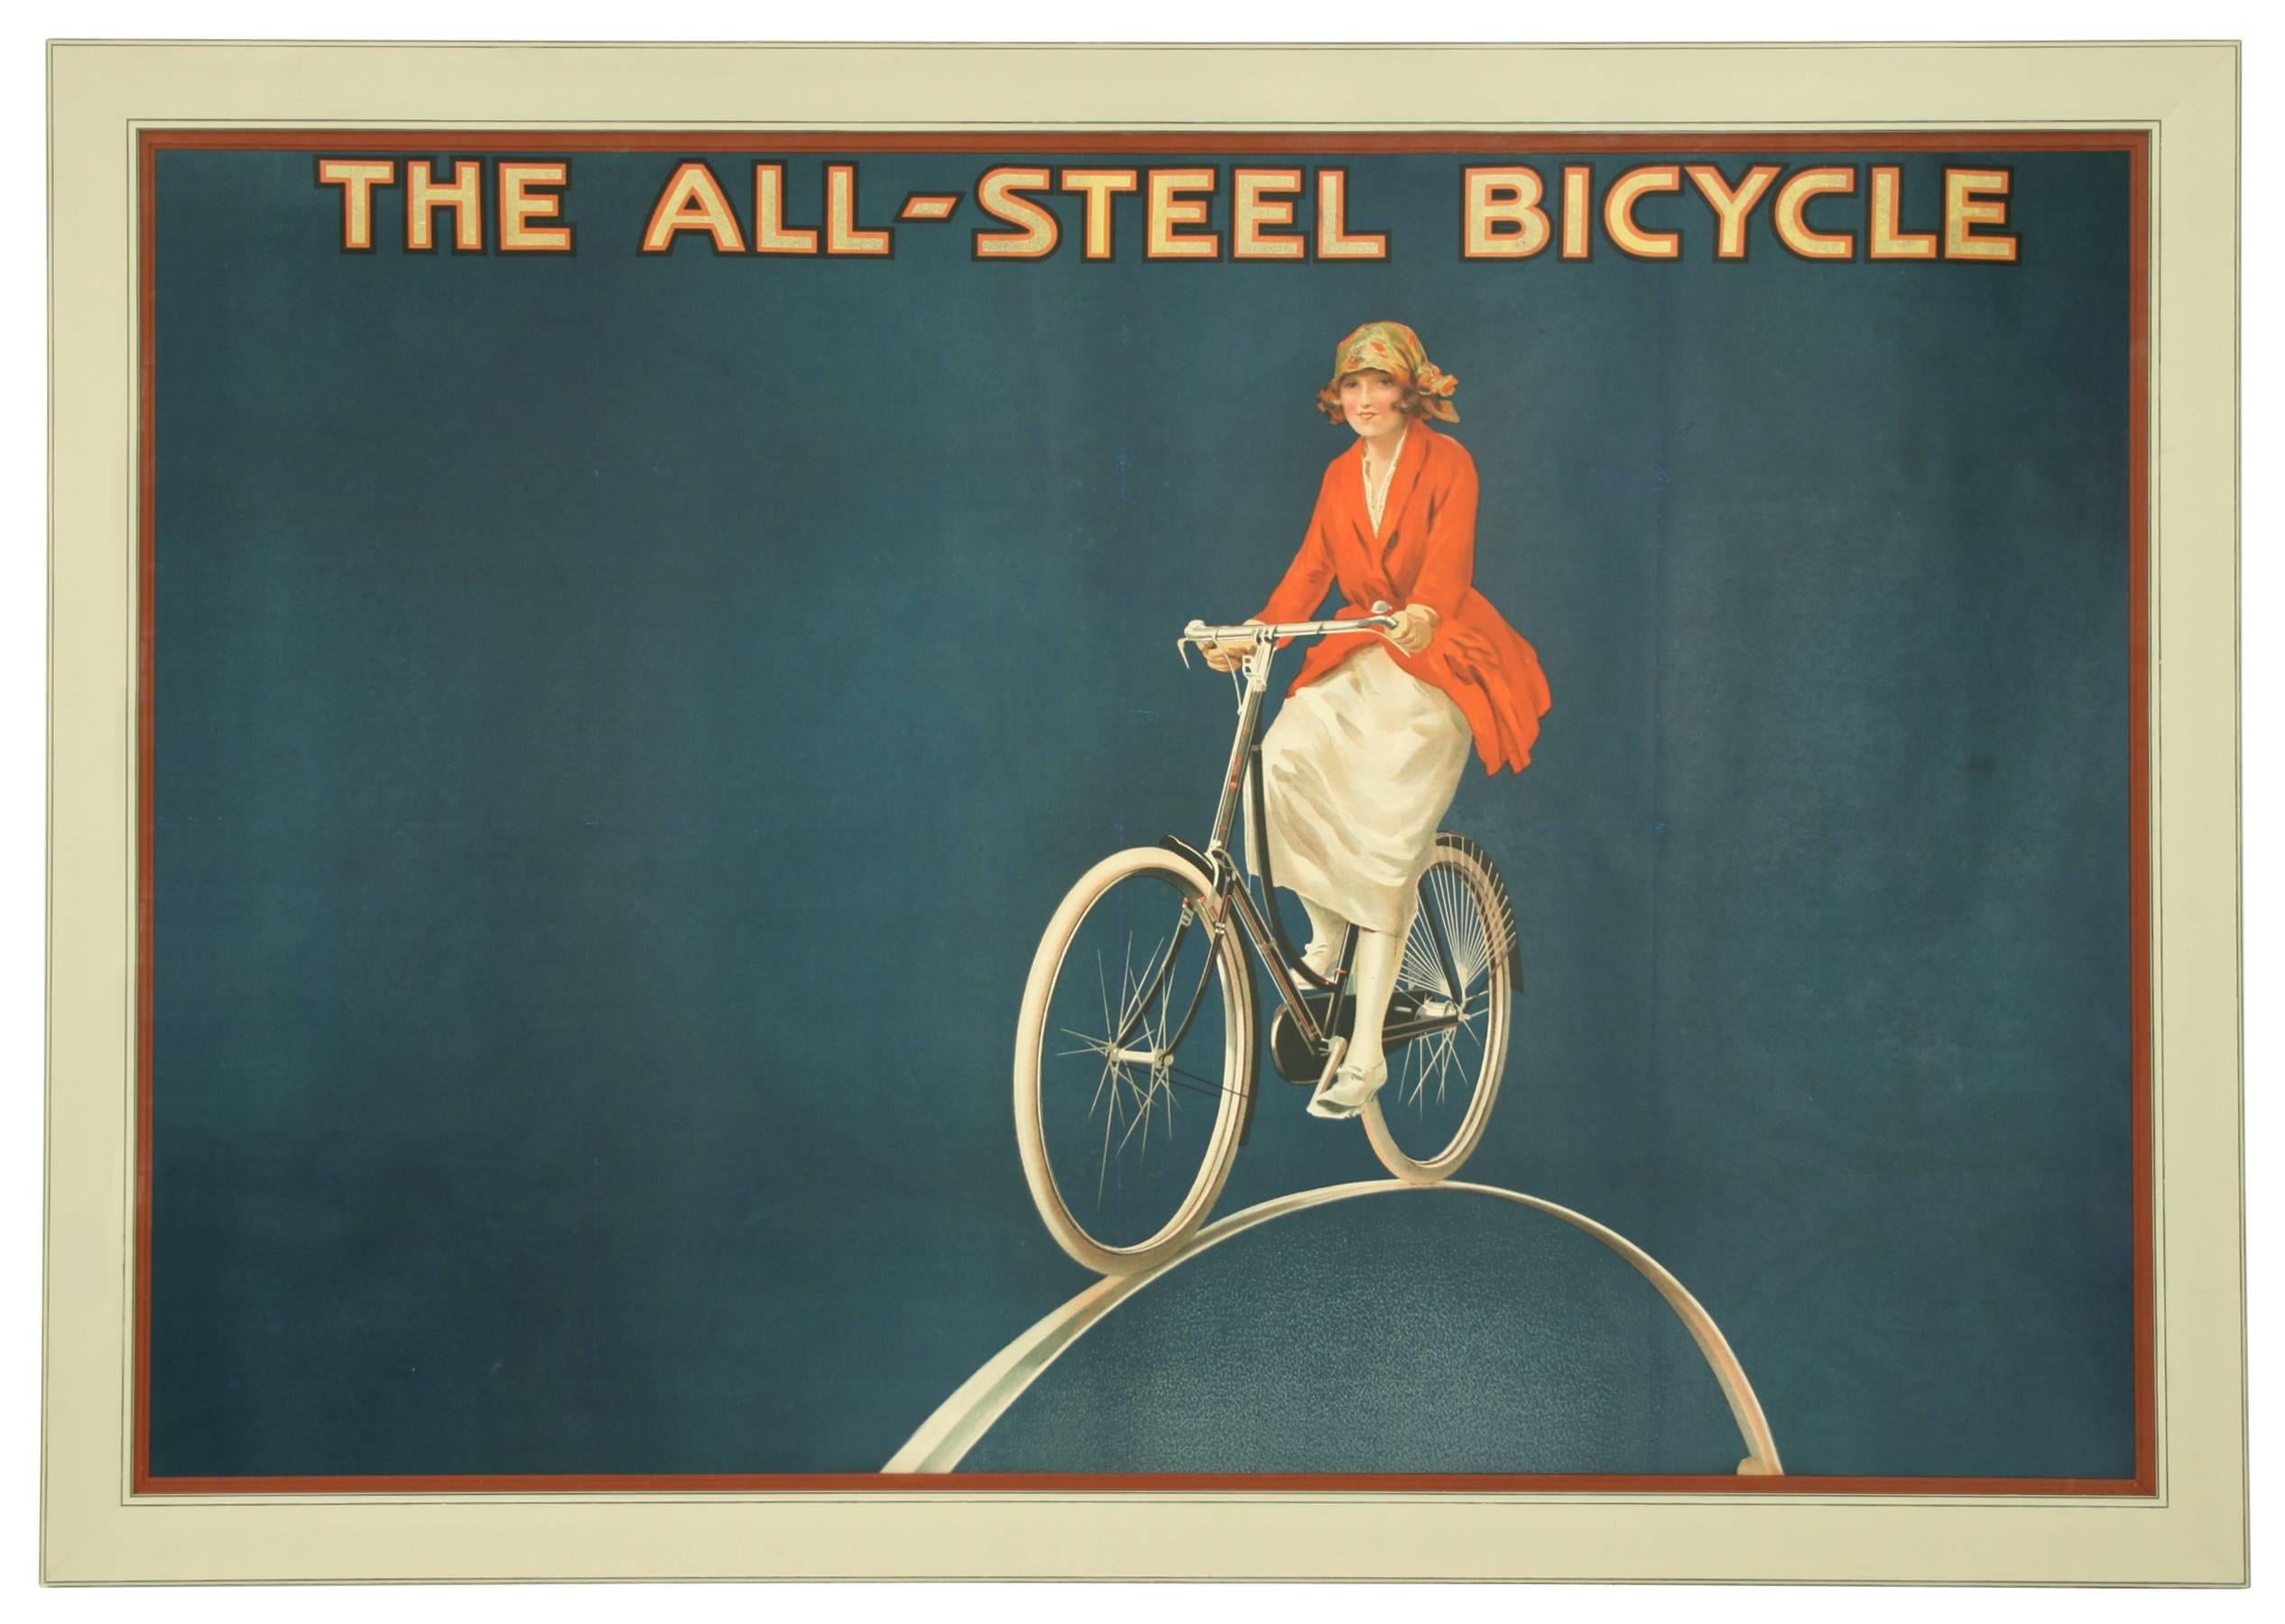 Vintage Raleigh Bicycle Advertising Poster.
A very evocative original Raleigh poster from the 1920s. The image shows a ‘modern’ independent woman on her All-Steel Raleigh bicycle, this image also appeared on some of Raleigh’s catalogues during the